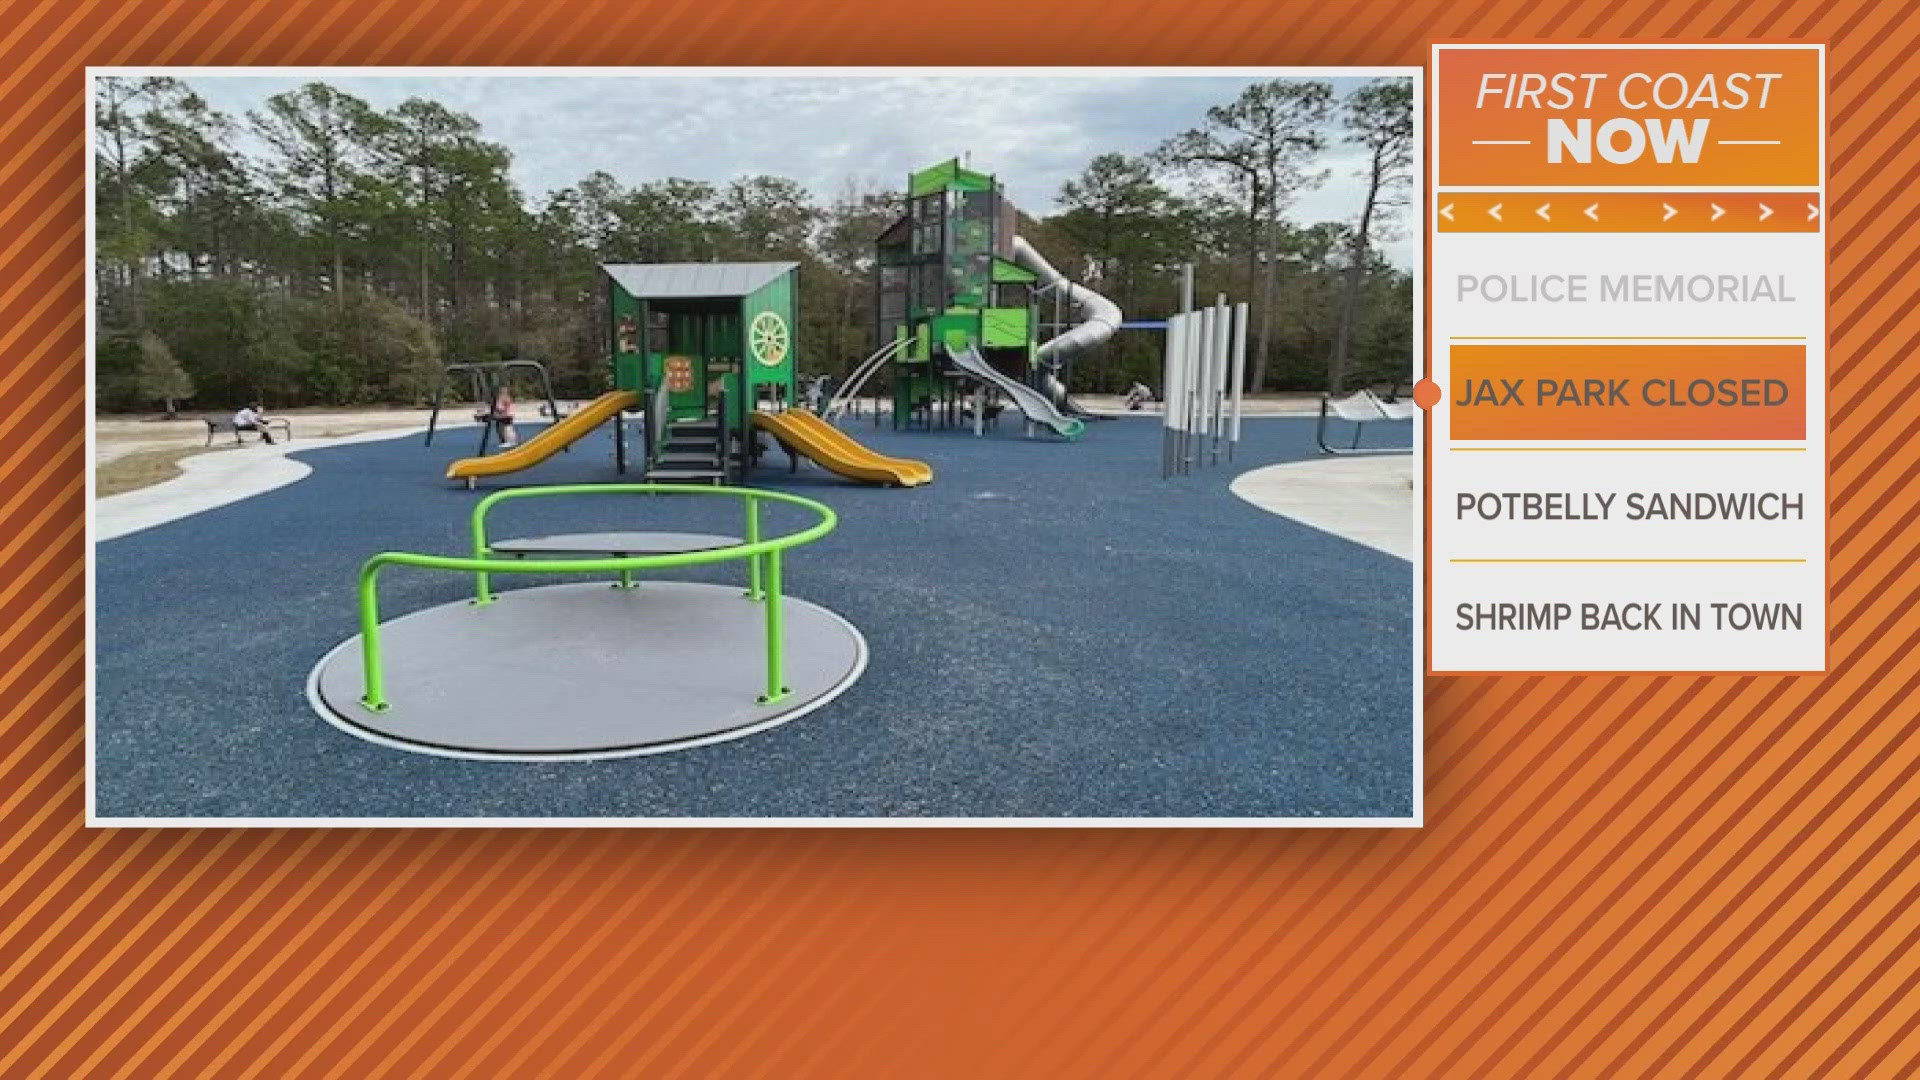 The city of Jacksonville says the inclusive playground is closed for maintenance. The playscapes will be enhanced.